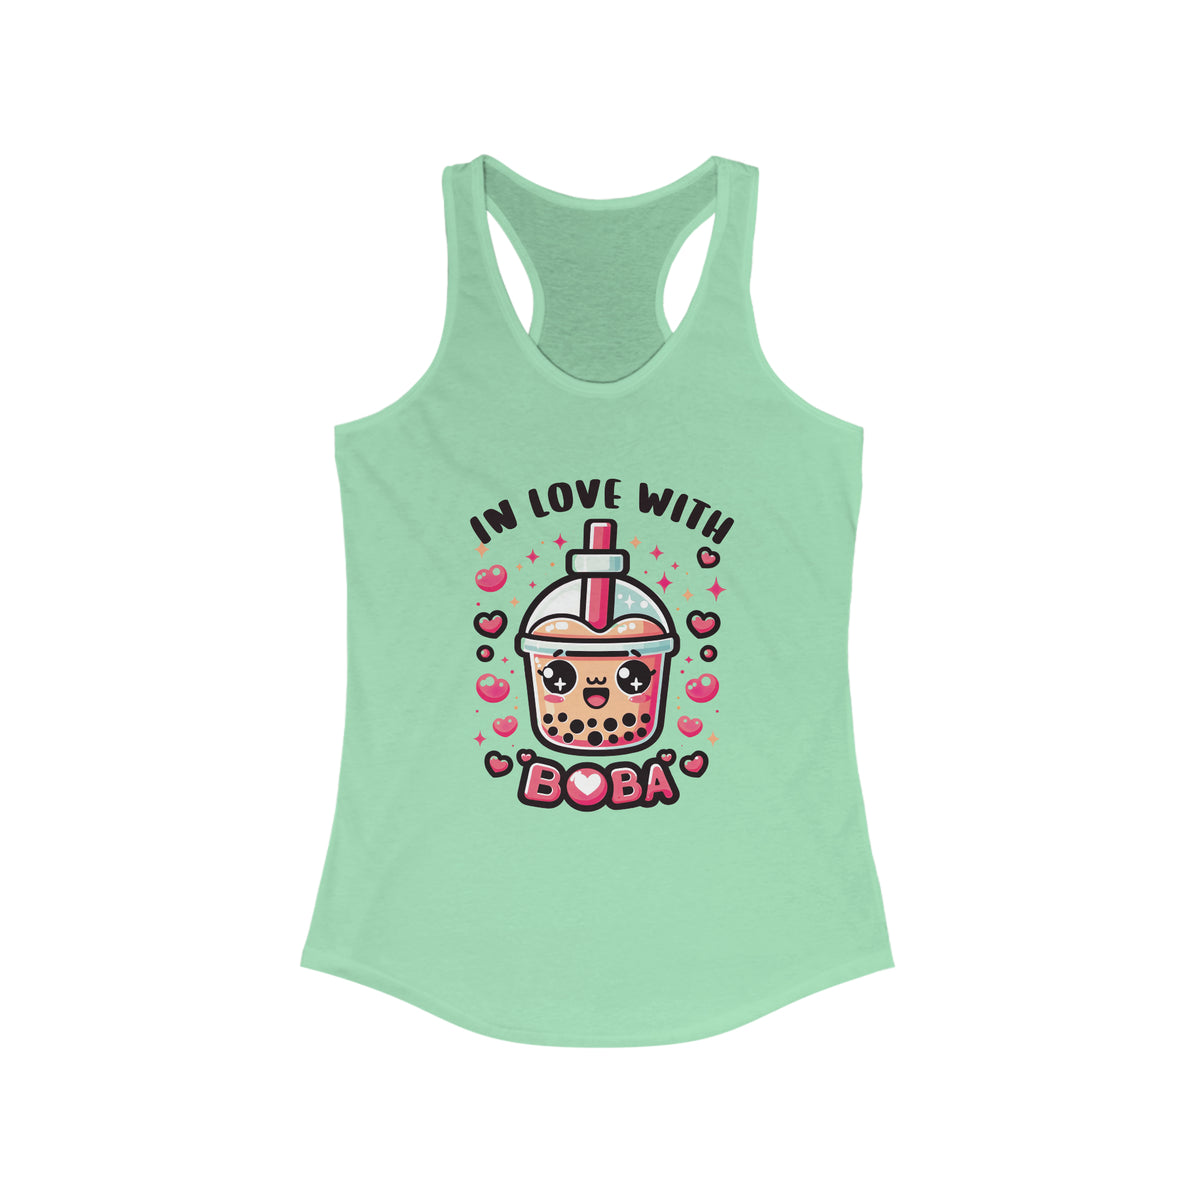 In Love With Boba Tea Lover Kawaii Shirt |  Cute Kawaii Valentine's Day Gift for Her | Women's Slim Fit Racerback Tank Top